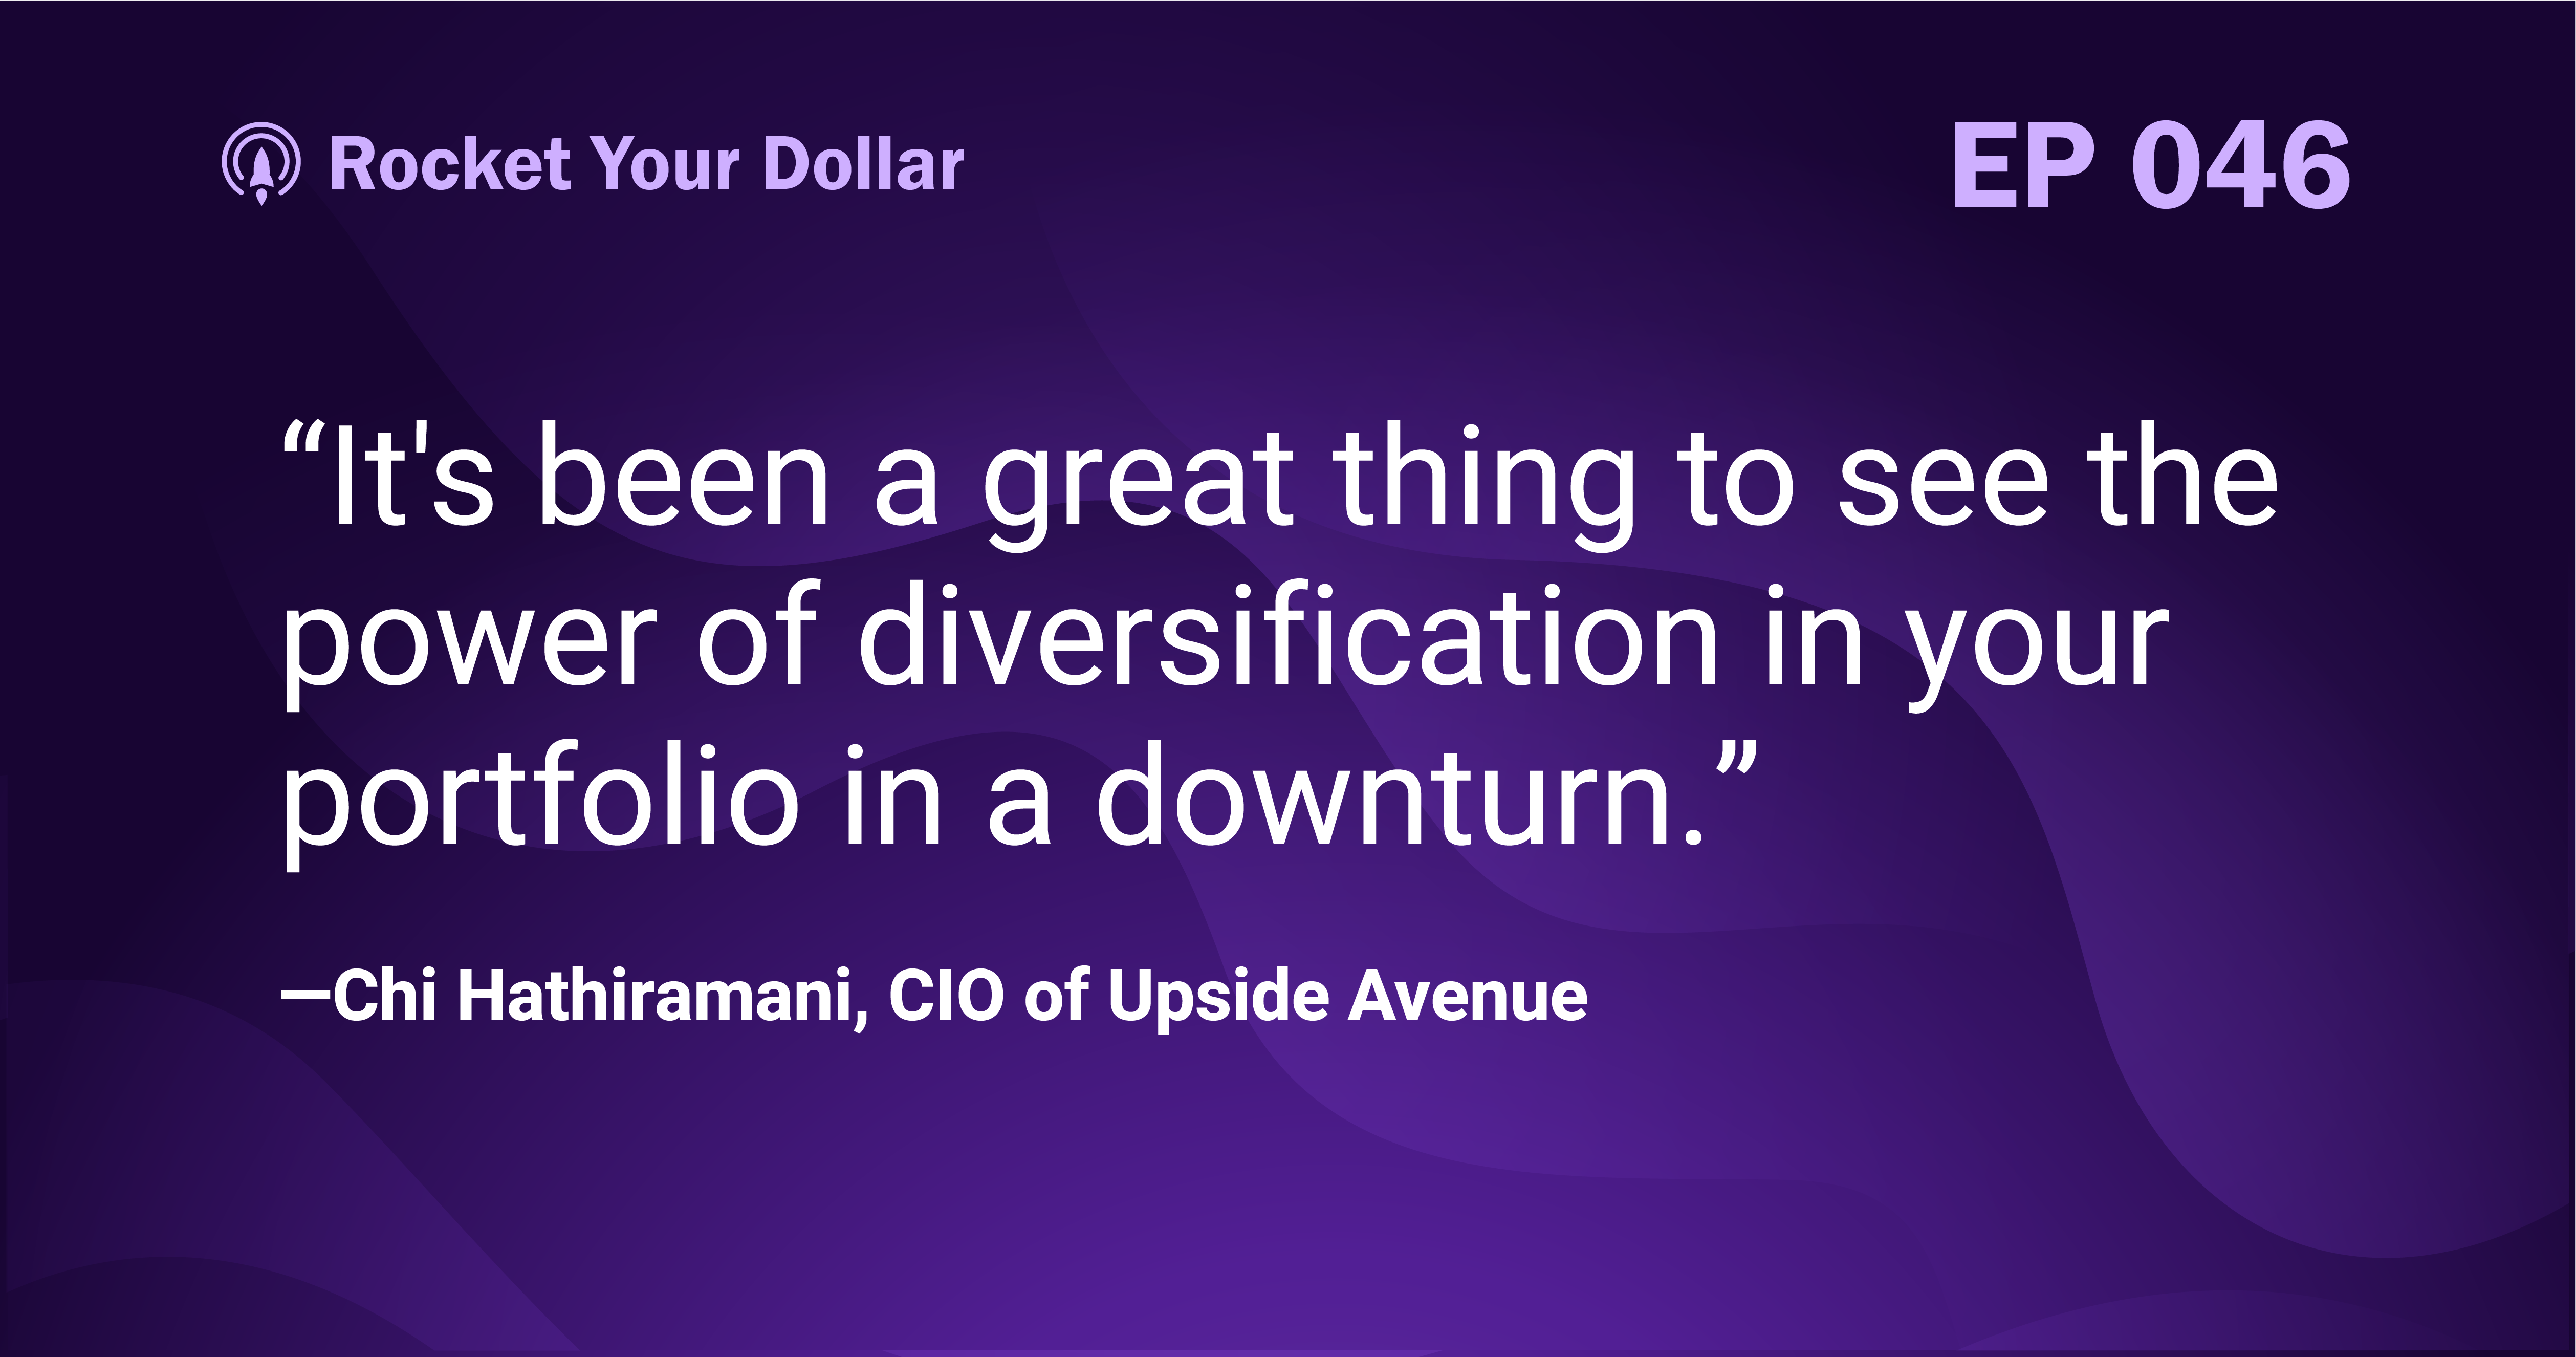 “It's been a great thing to see the power of diversification in your portfolio in a downturn.” —Chi Hathiramani, CIO of Upside Avenue